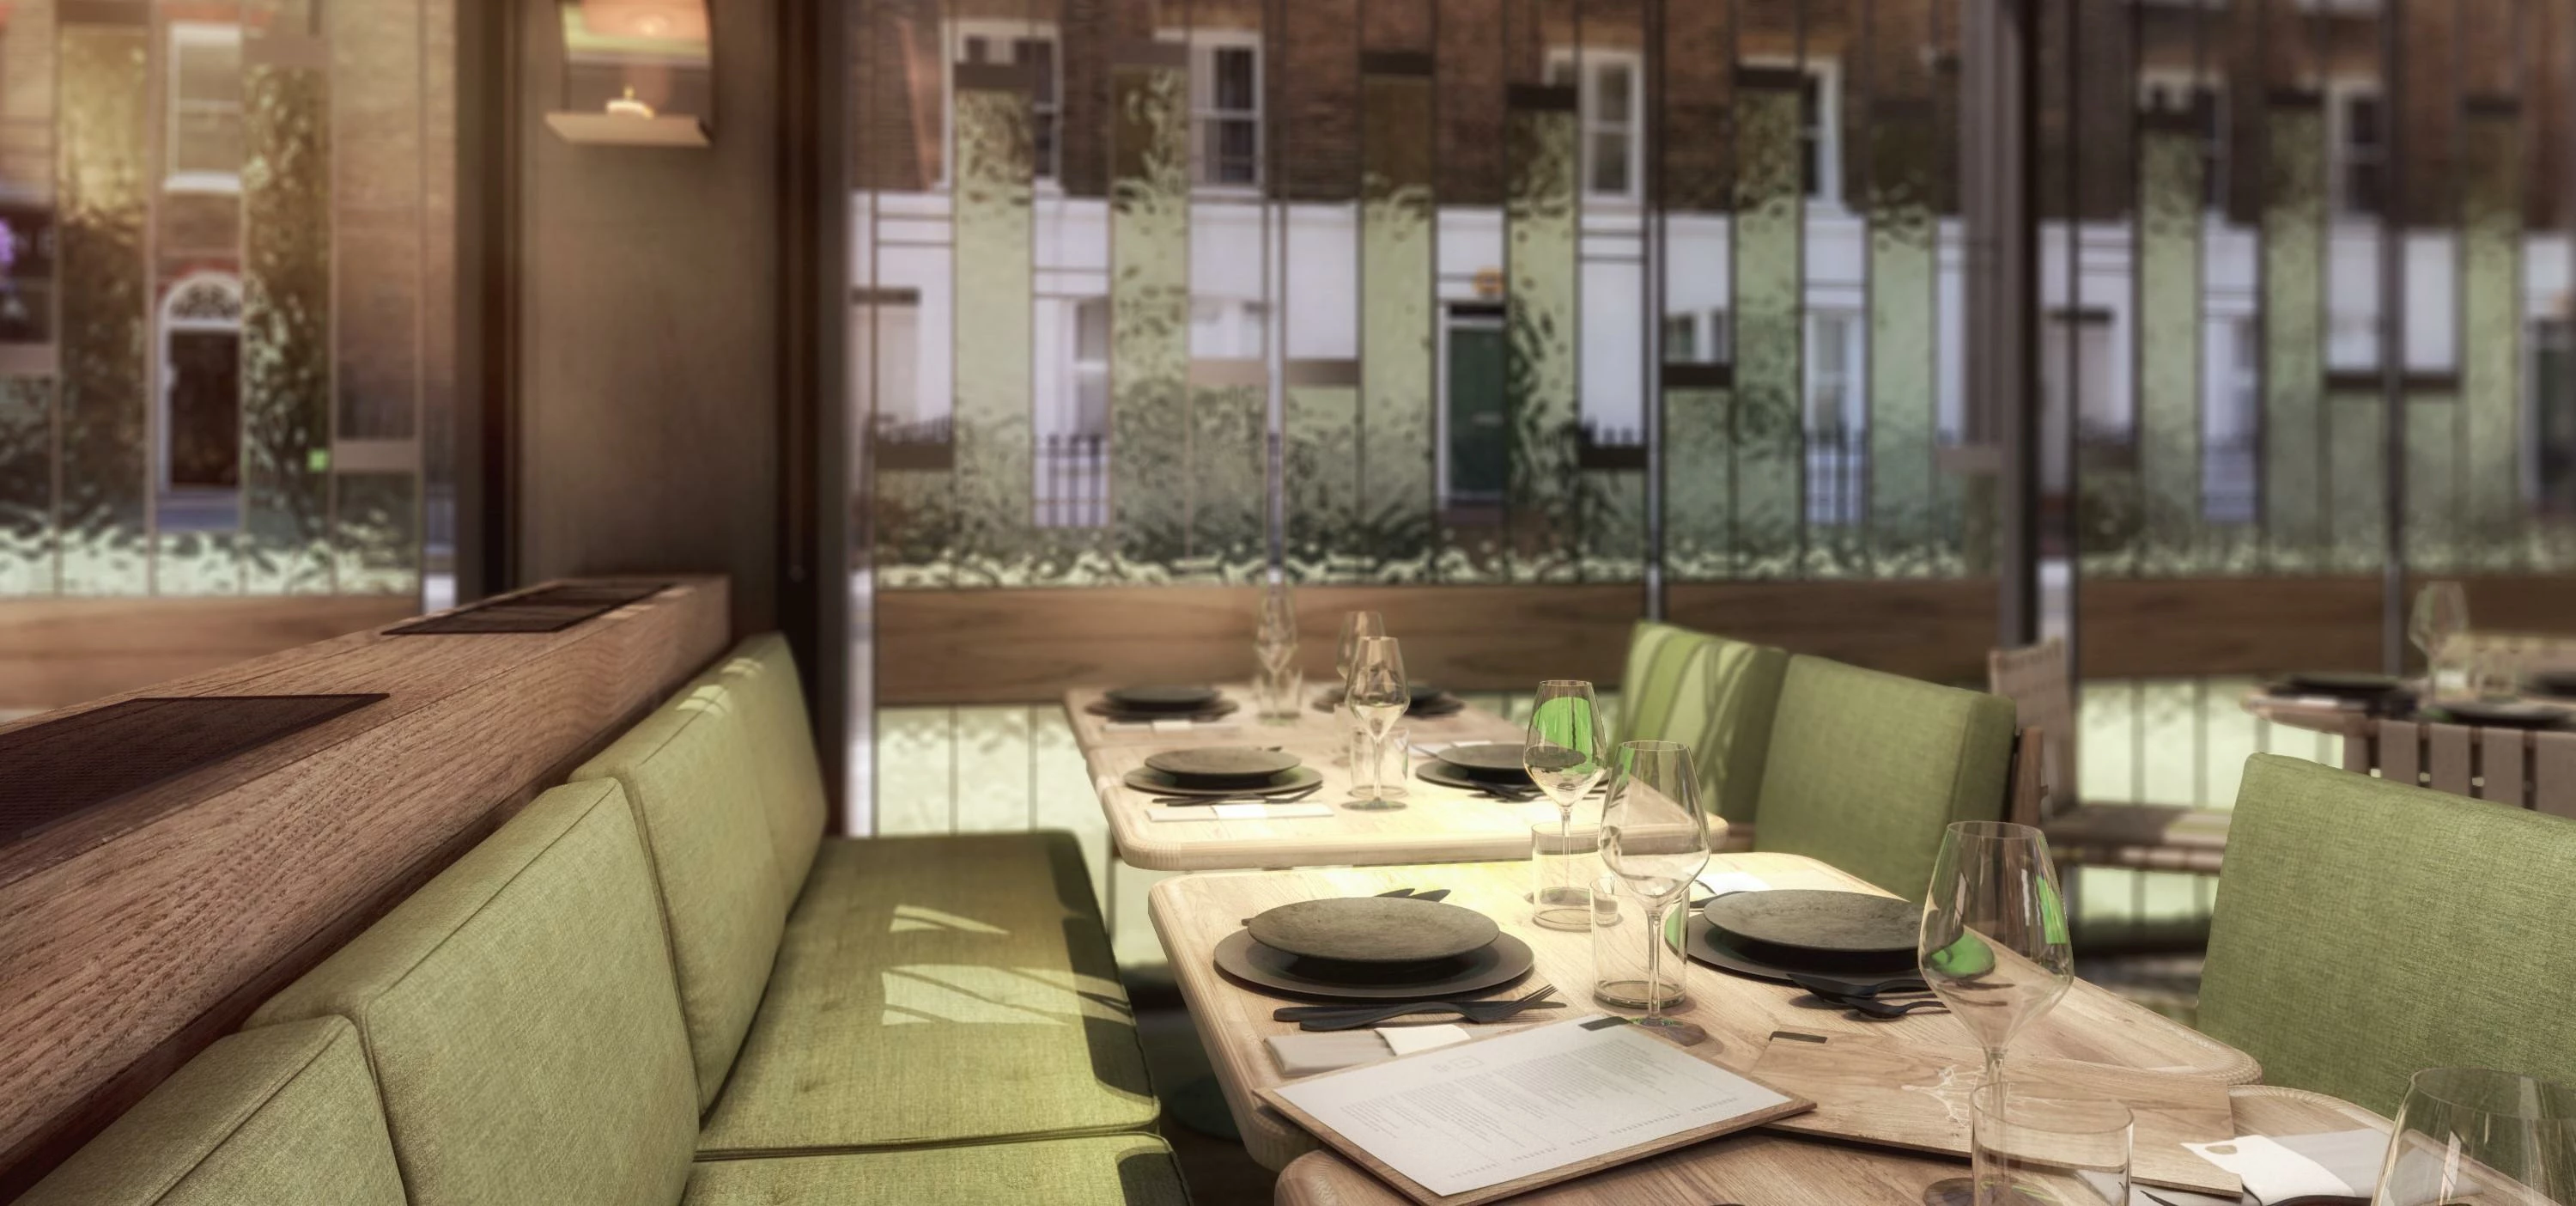 Artist's impression of the interior of Fucina which is opening in Marylebone this October.